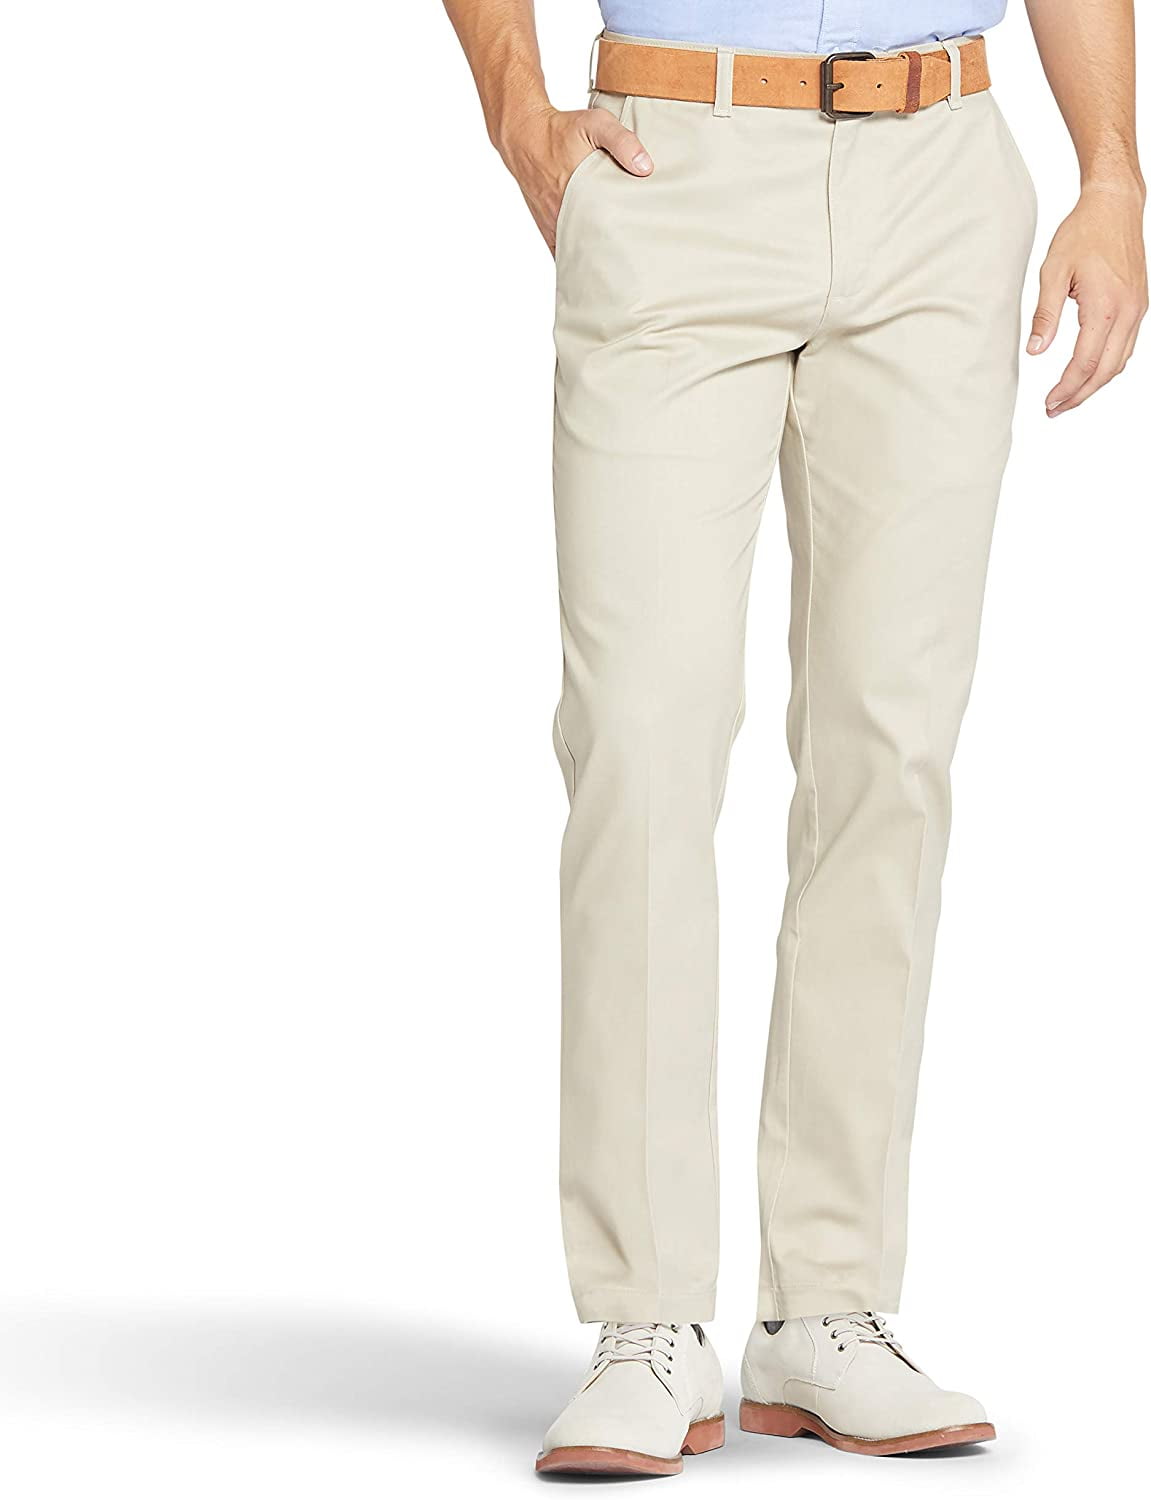 Lee Men's Total Freedom Stretch Straight Fit Flat Front Pant 